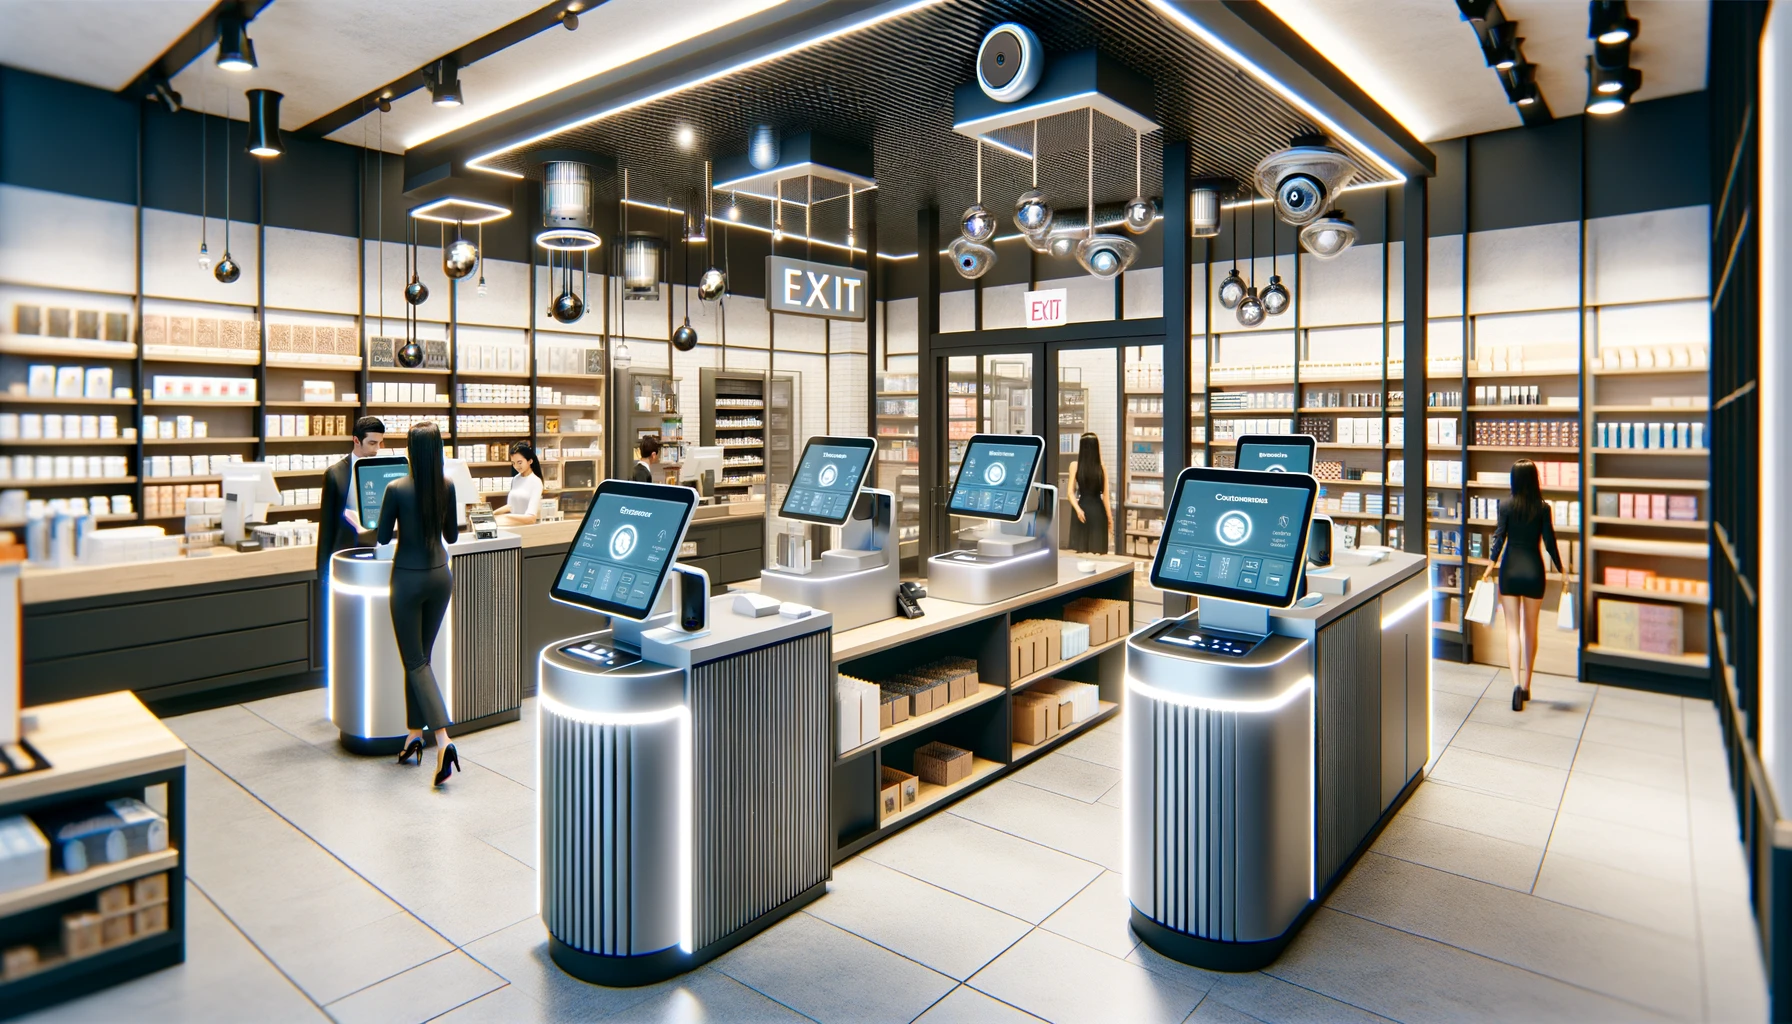 Larger Stores Might Face Challenges Scaling Up AI-Powered Exit Technology for Faster Checkouts